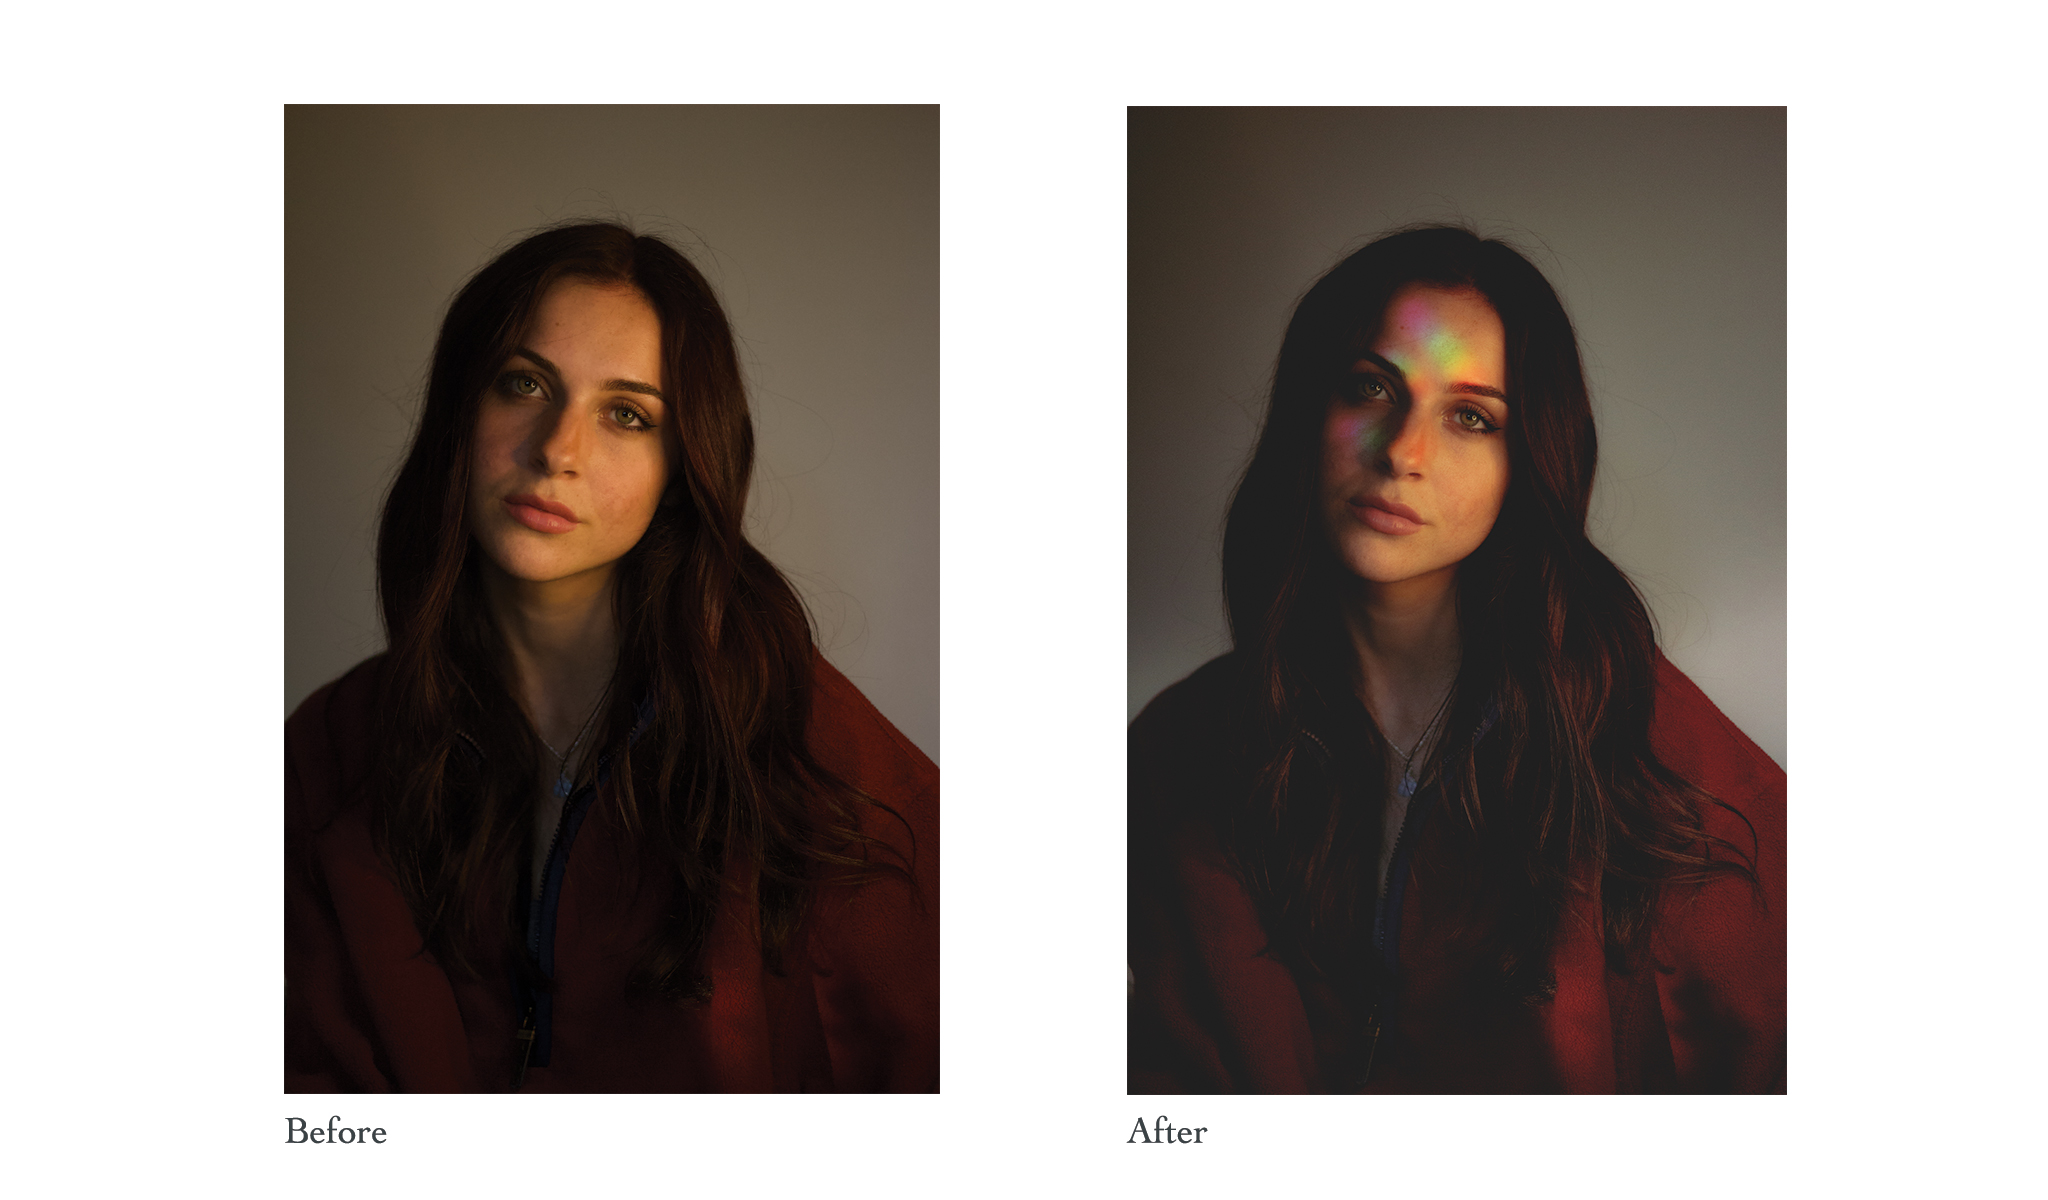 A self portrait with before and after editing displayed.